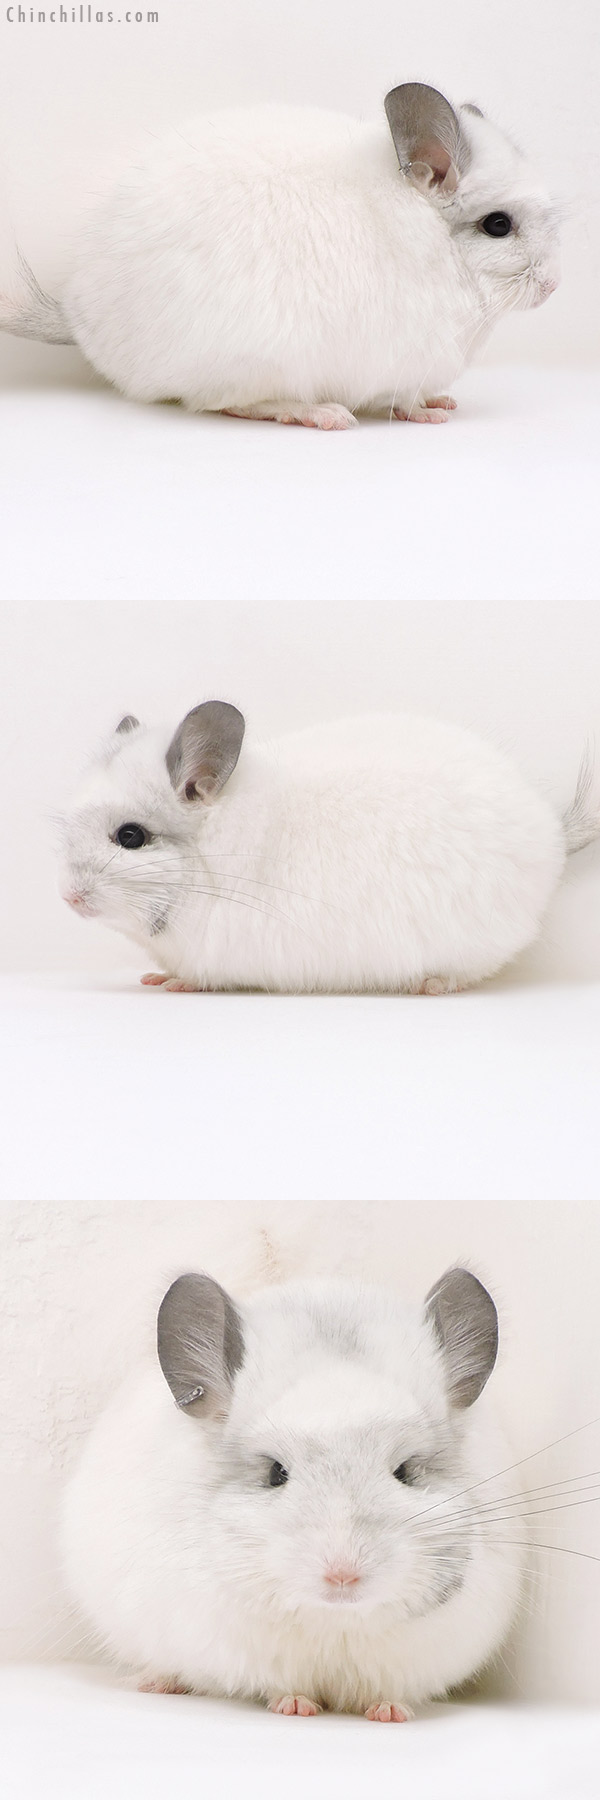 Chinchilla or related item offered for sale or export on Chinchillas.com - 17151 Exceptional White Mosaic  Royal Persian Angora Female Chinchilla